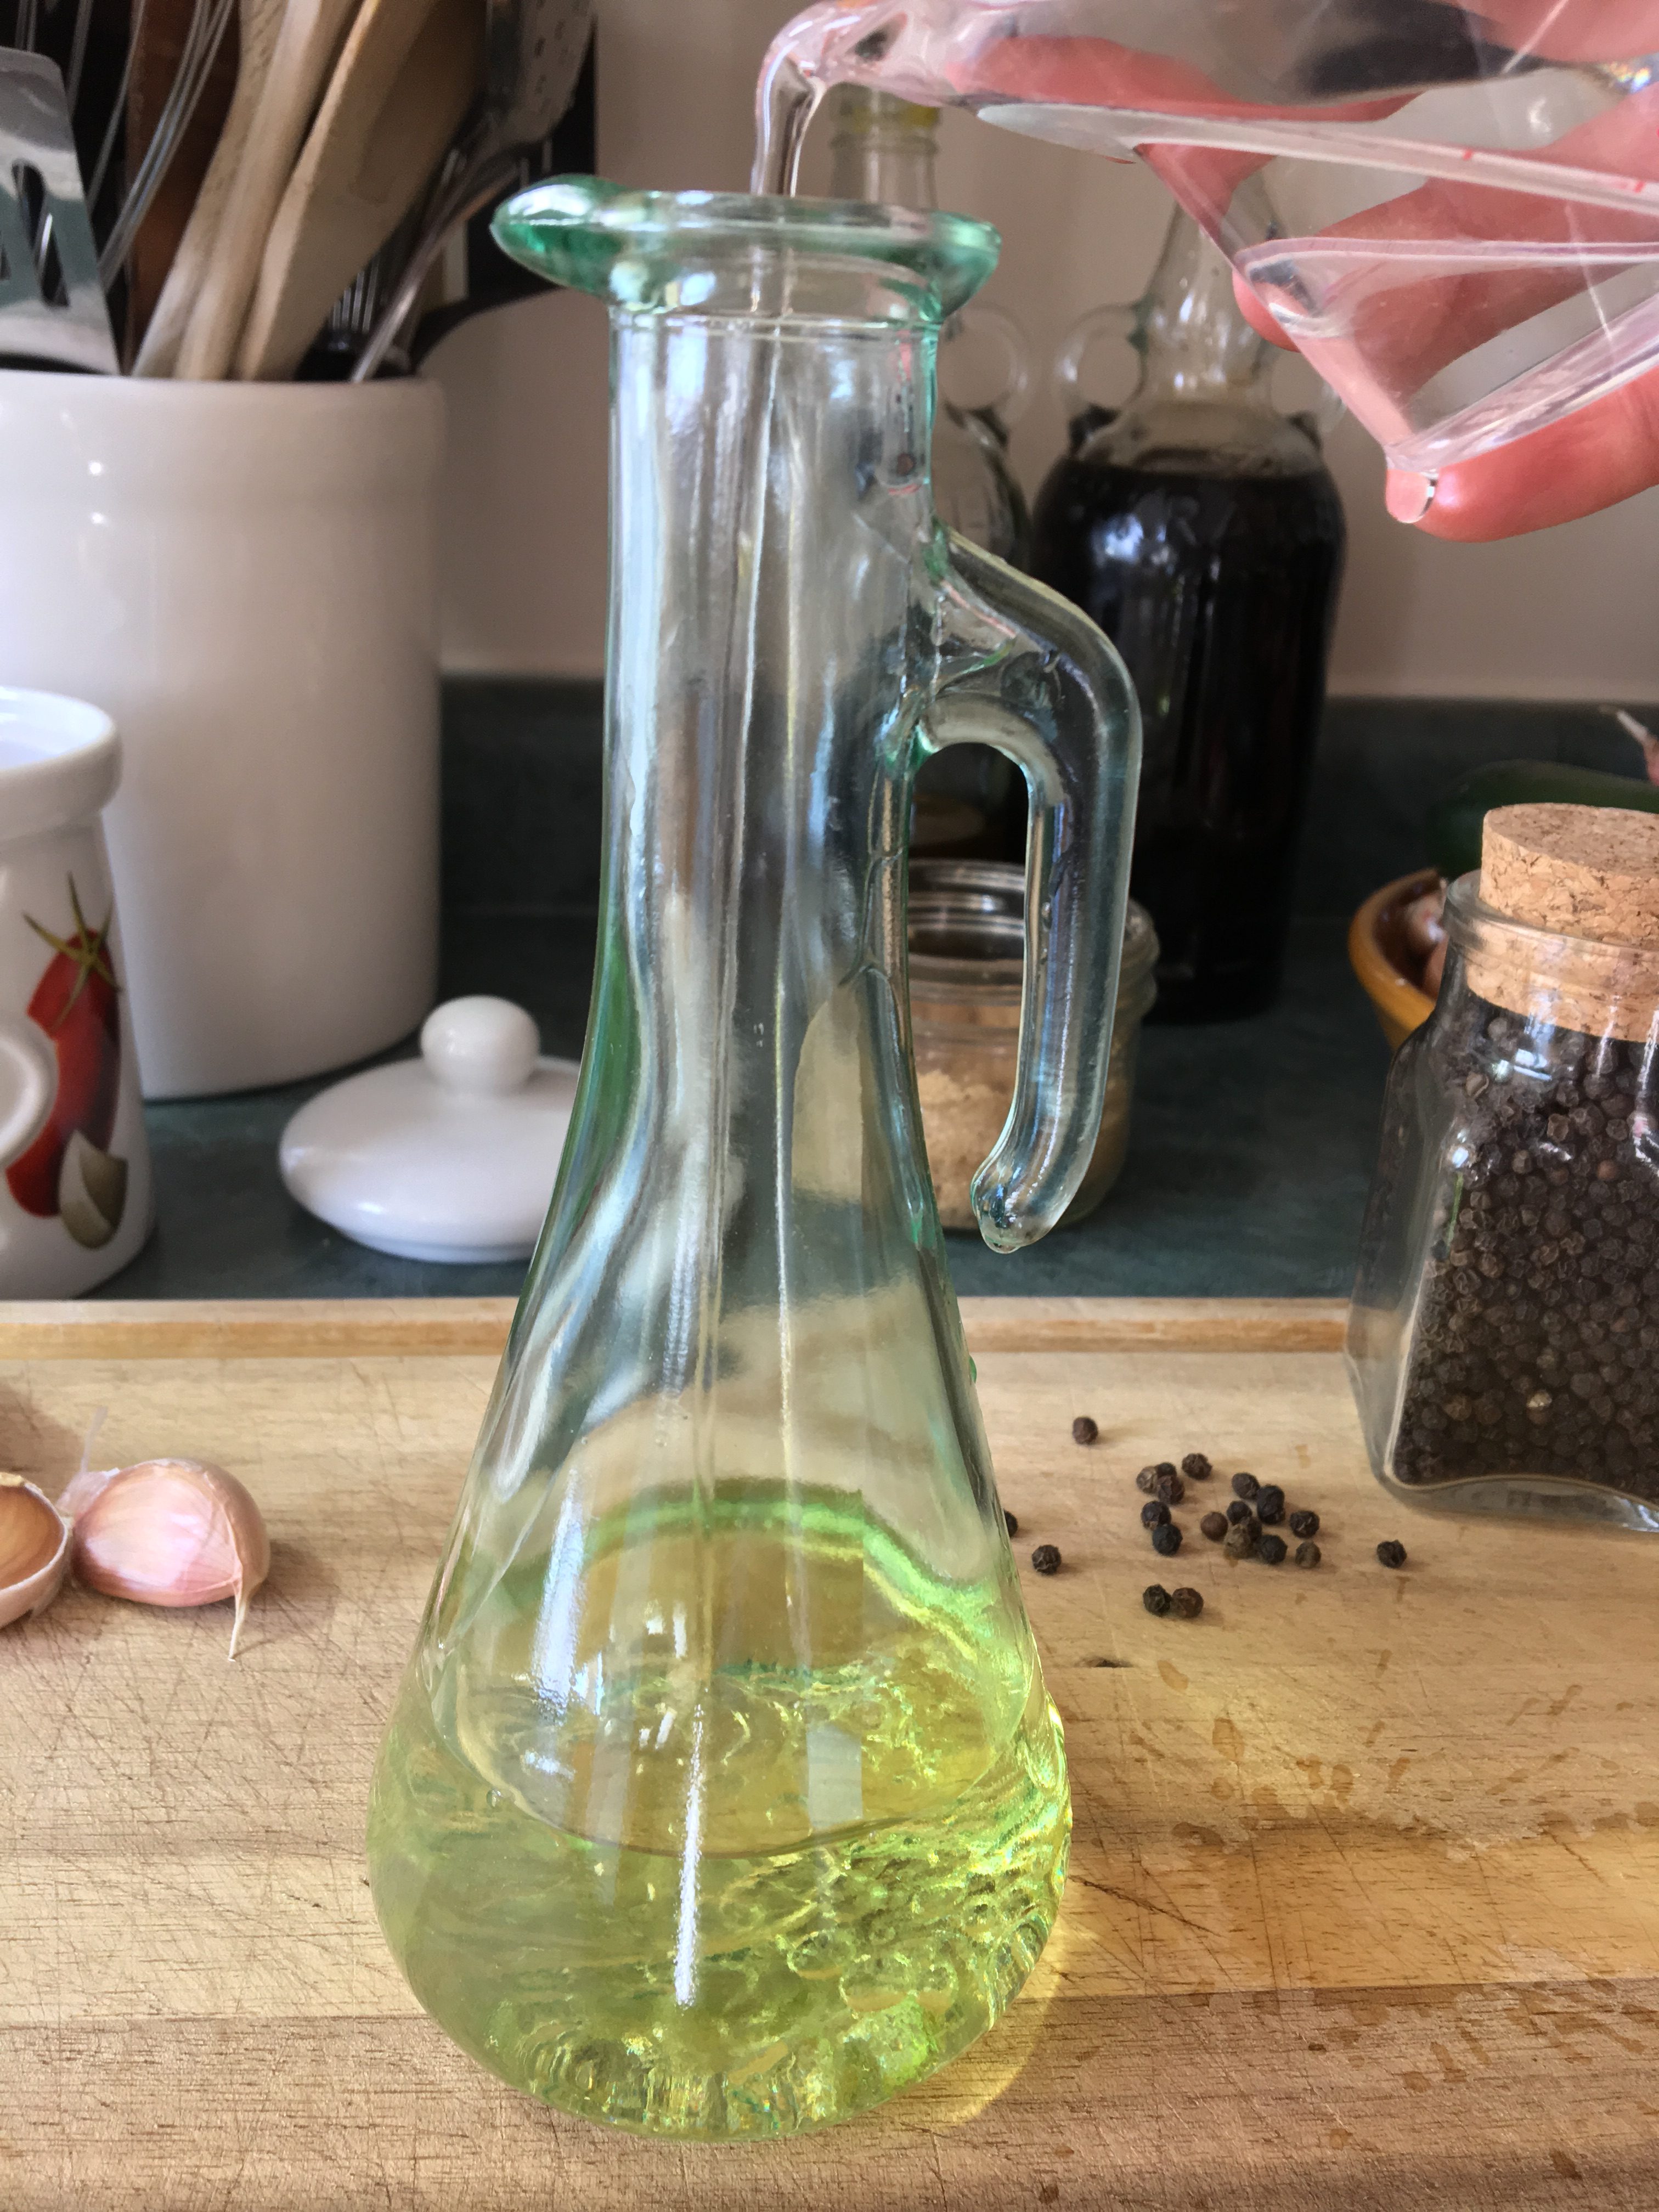 Oil and Vinegar Dressing - The Gourmet Housewife